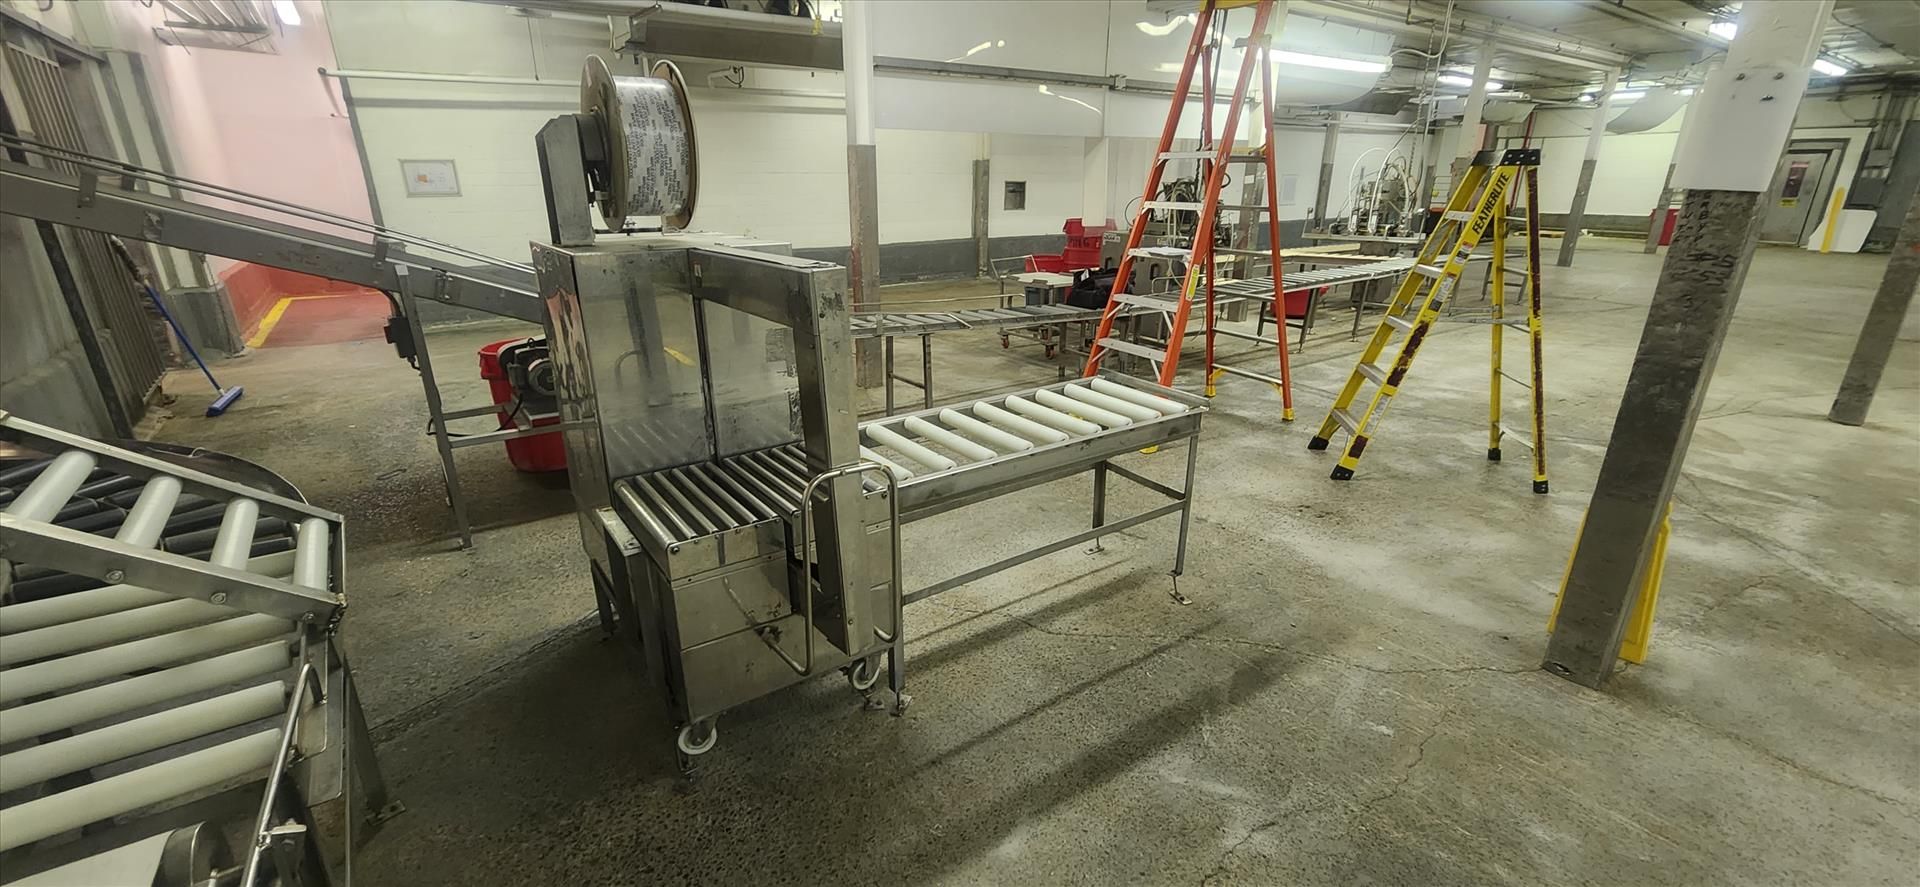 Strap Pack box strapper, stainless steel c/w conveyor, roller, stainless steel frame, approx. 19 in. - Image 3 of 4